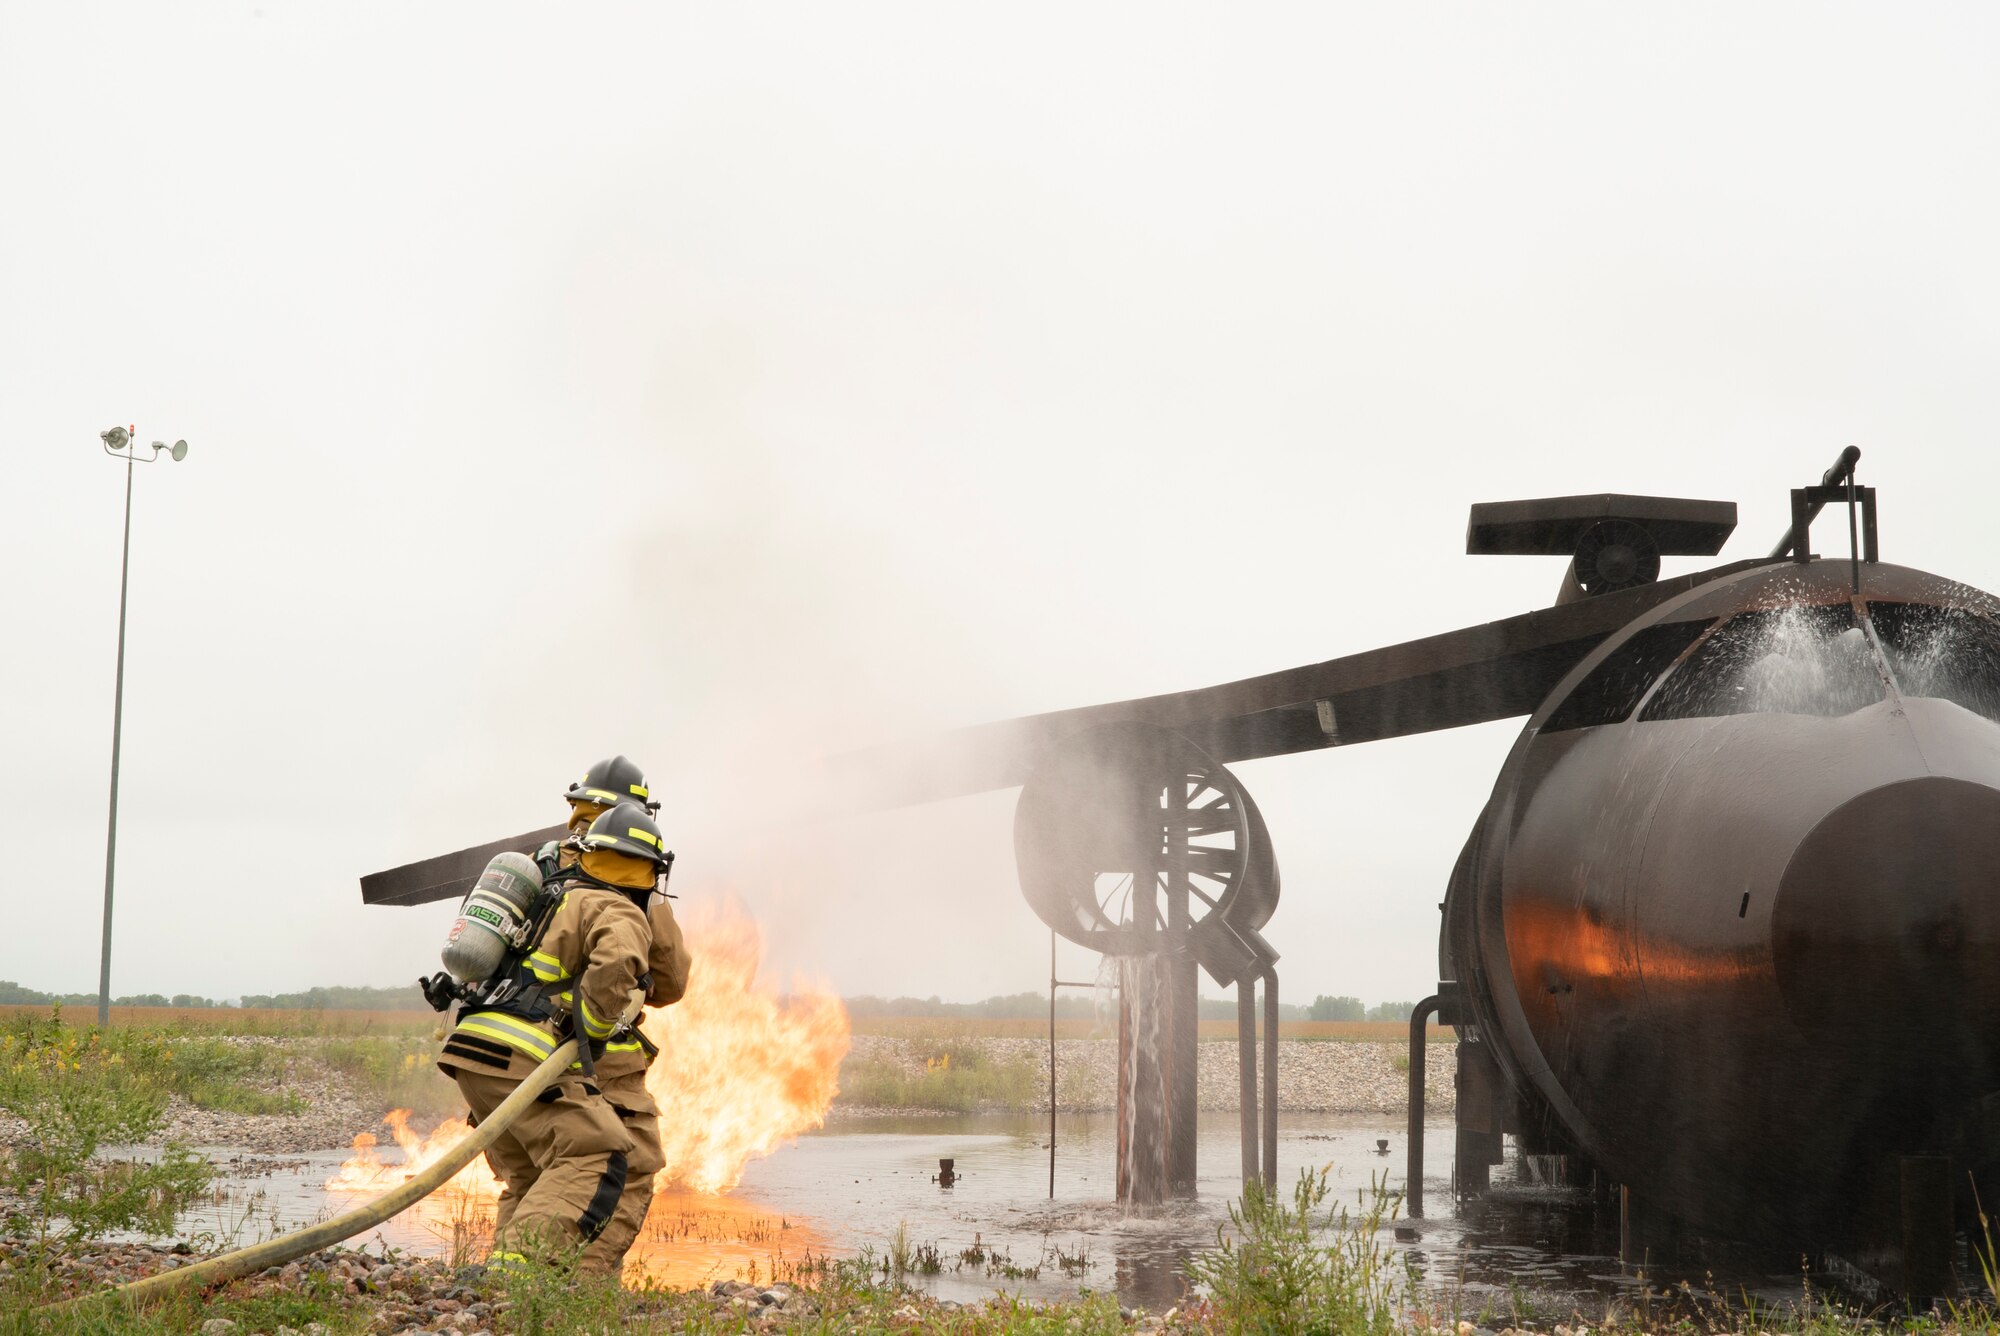 319th CES and Grand Forks International Airport firefighters joined to practice combating aircraft fires in an effort to train on readiness and maintain community relationships.